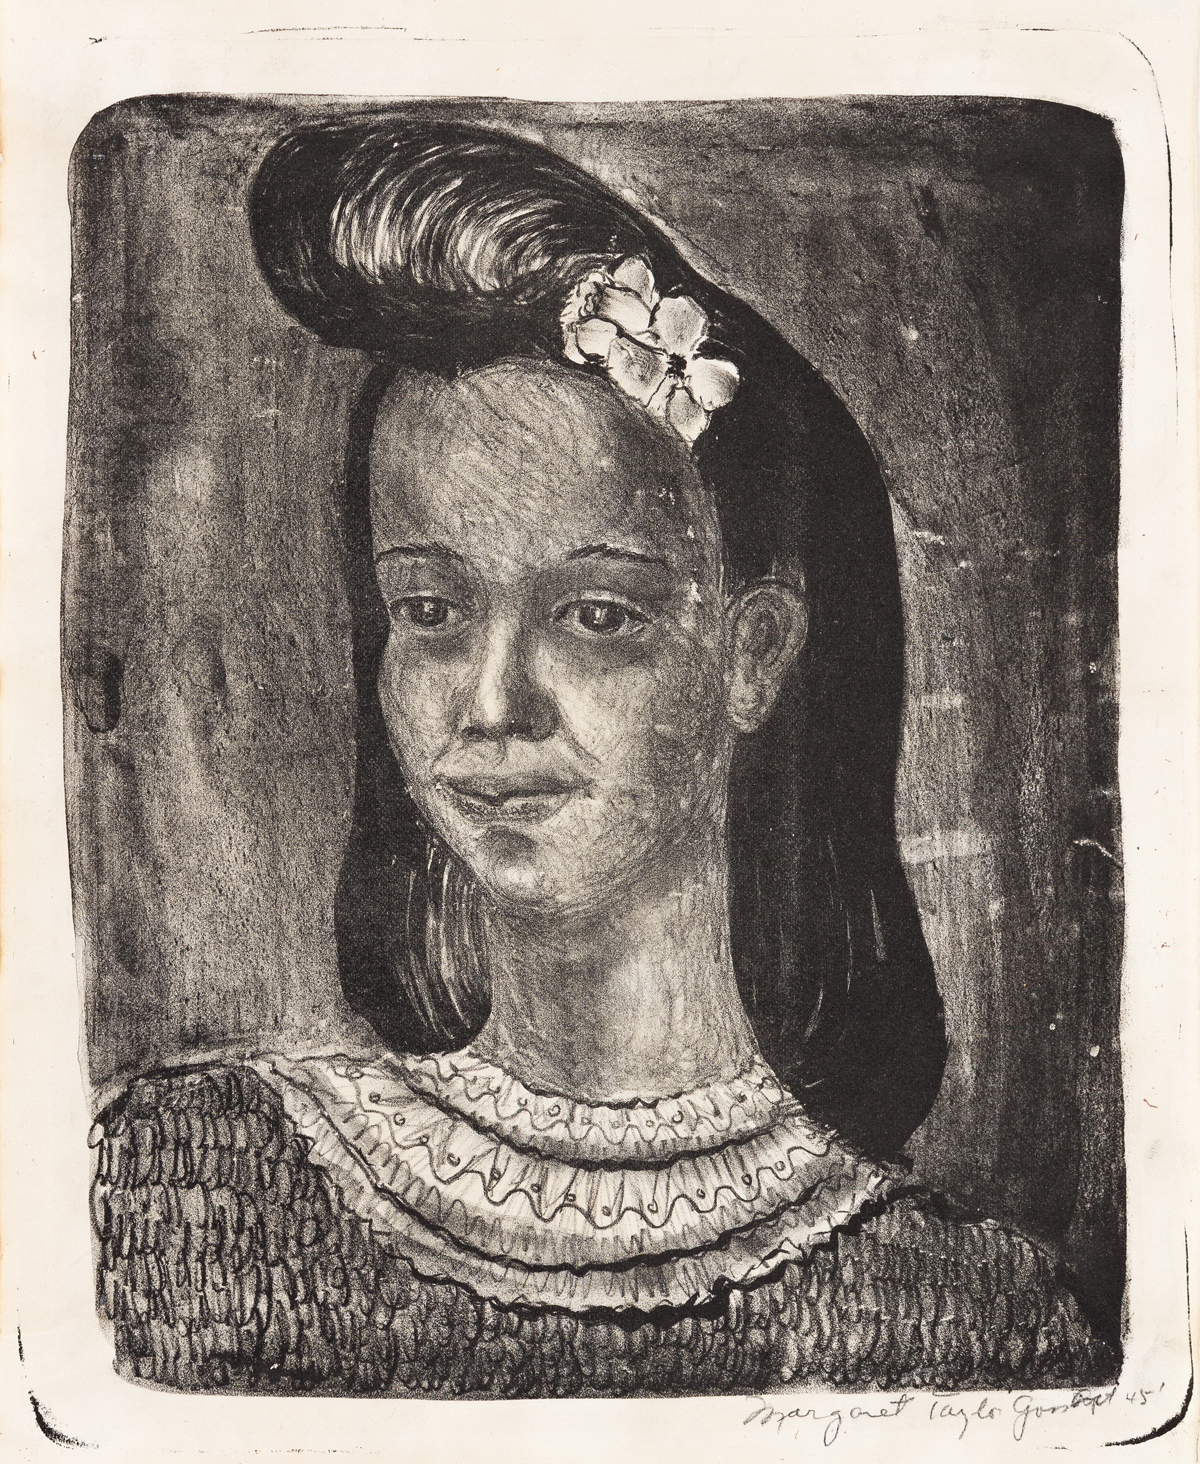 MARGARET BURROUGHS (1917 - 2010) Untitled (Portait of a Young Woman).